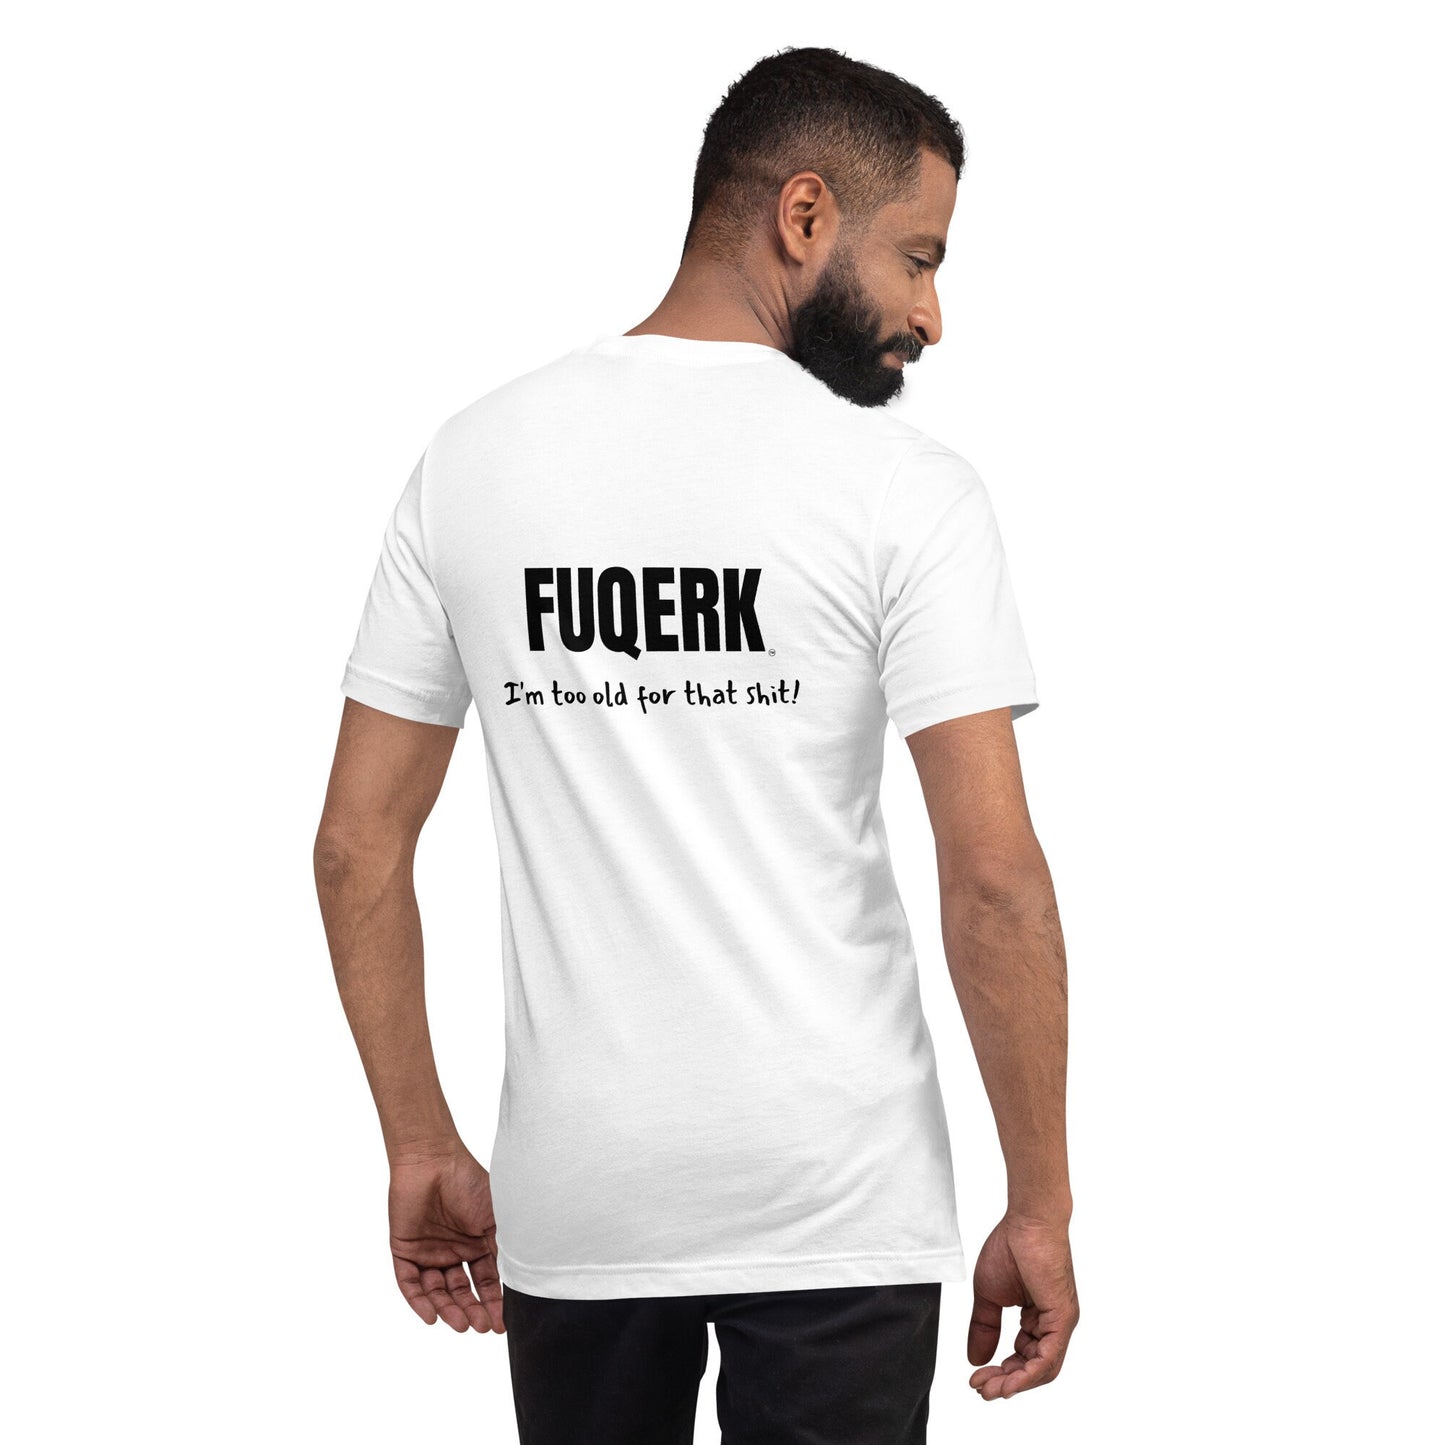 FUQERK Vibes: 'I'm Too Old for This Sh*t!' - White Unisex Tee